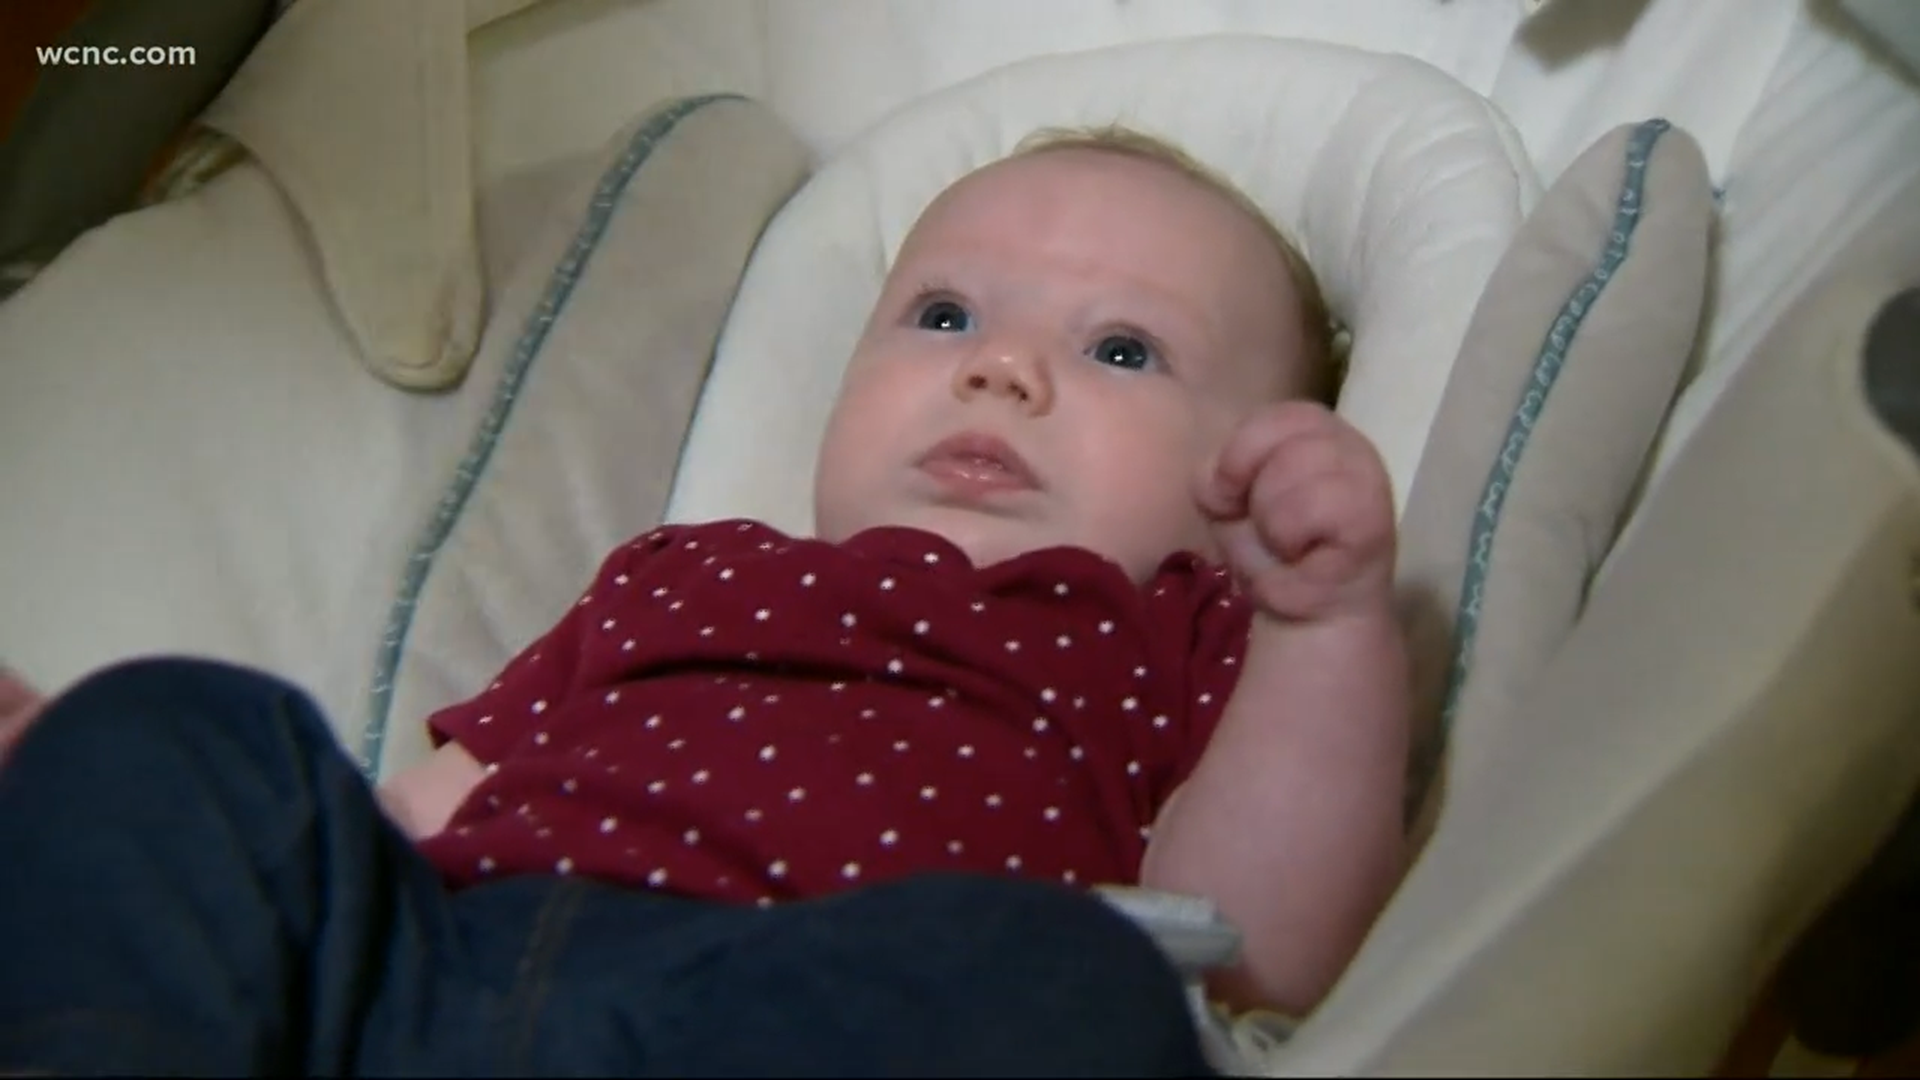 A hidden camera caught a Gaston County babysitter crossing the line with a Cherryville infant, but police have not opened an investigation, according to the family.